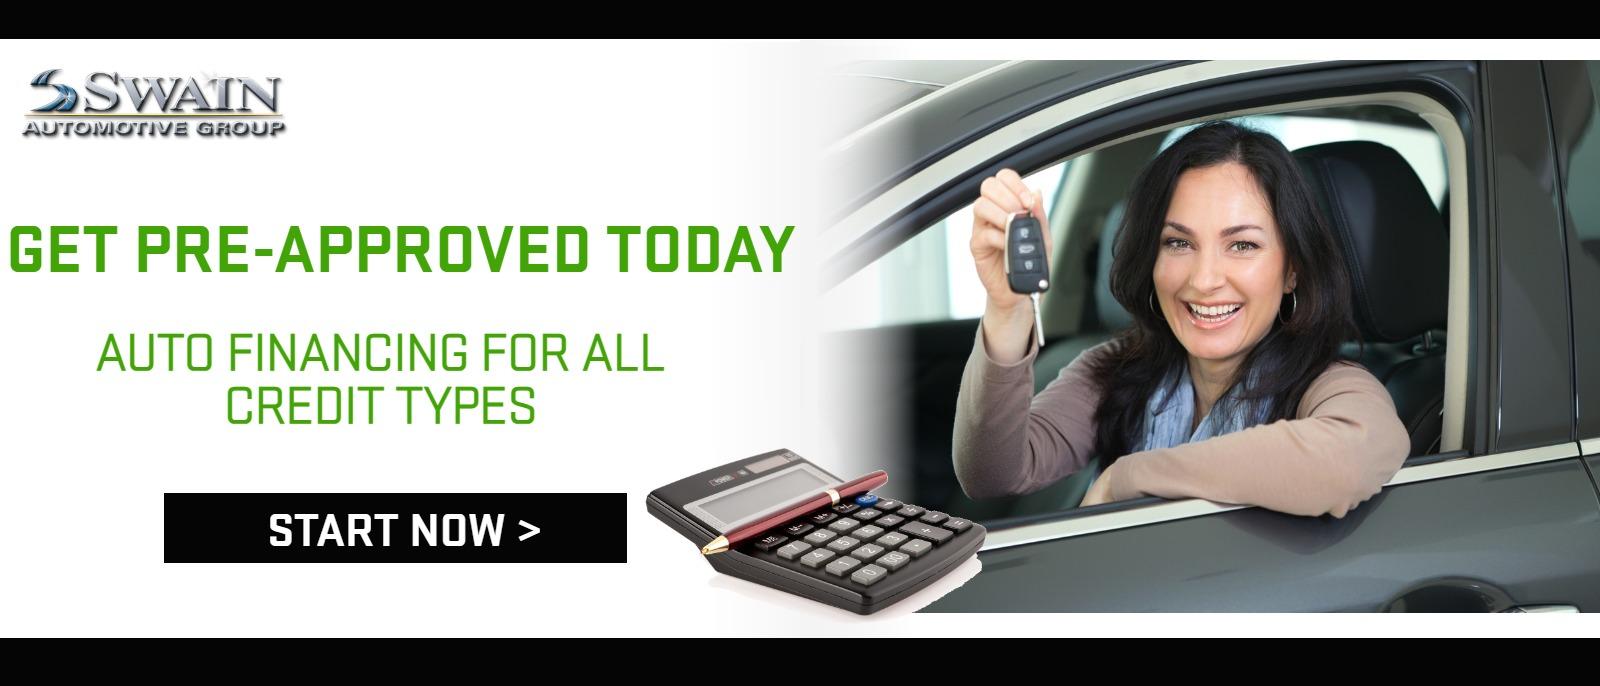 Get Pre-Approved Today
Auto Financing for all credit types
Start Now >